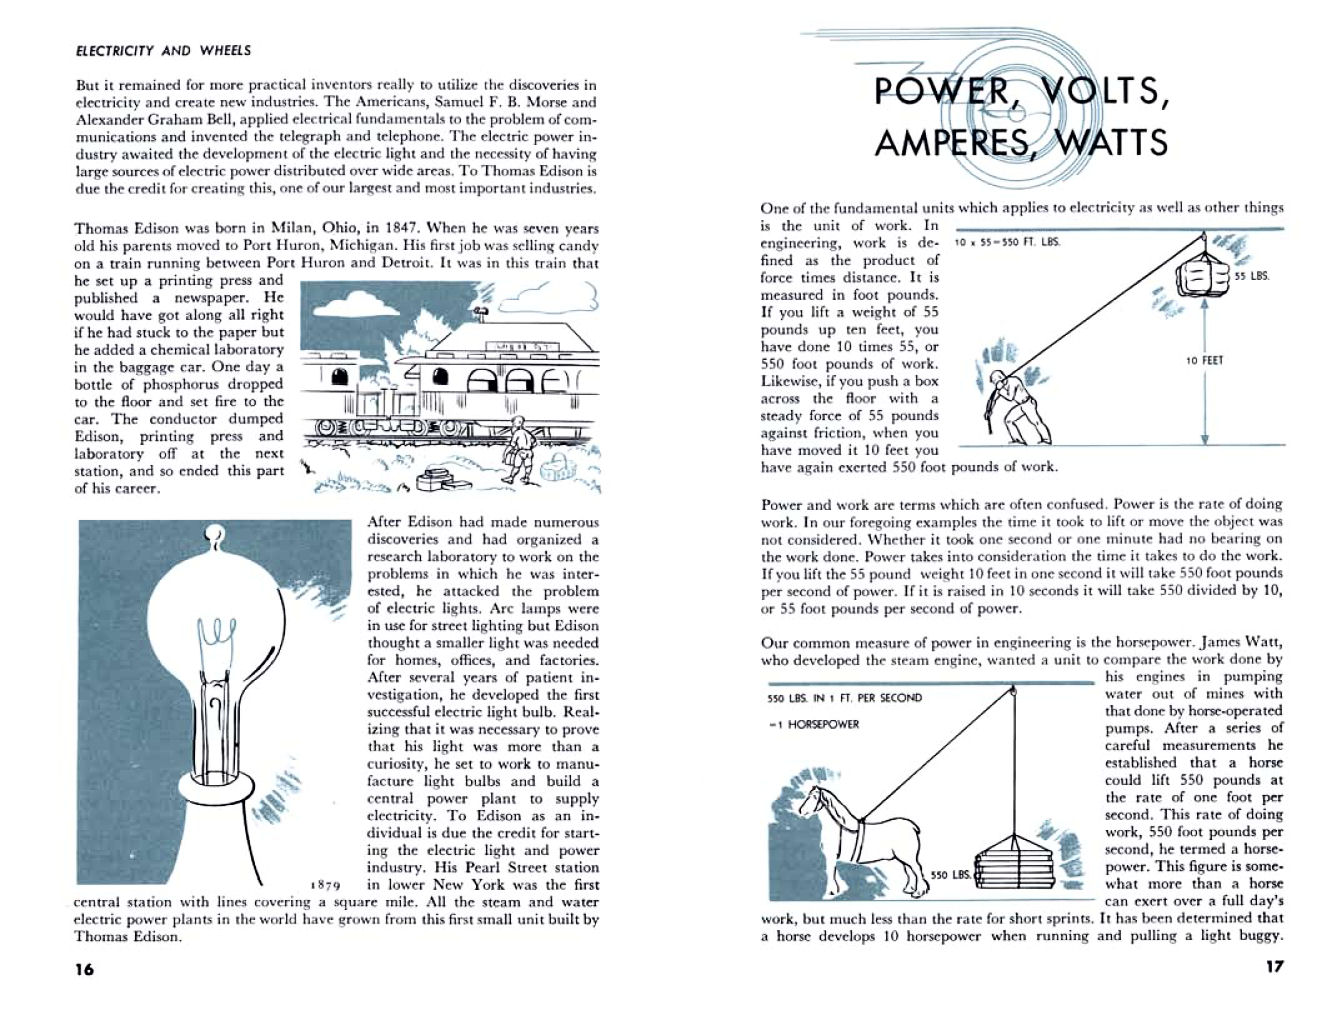 1953-Electricity_and_Wheels-16-17